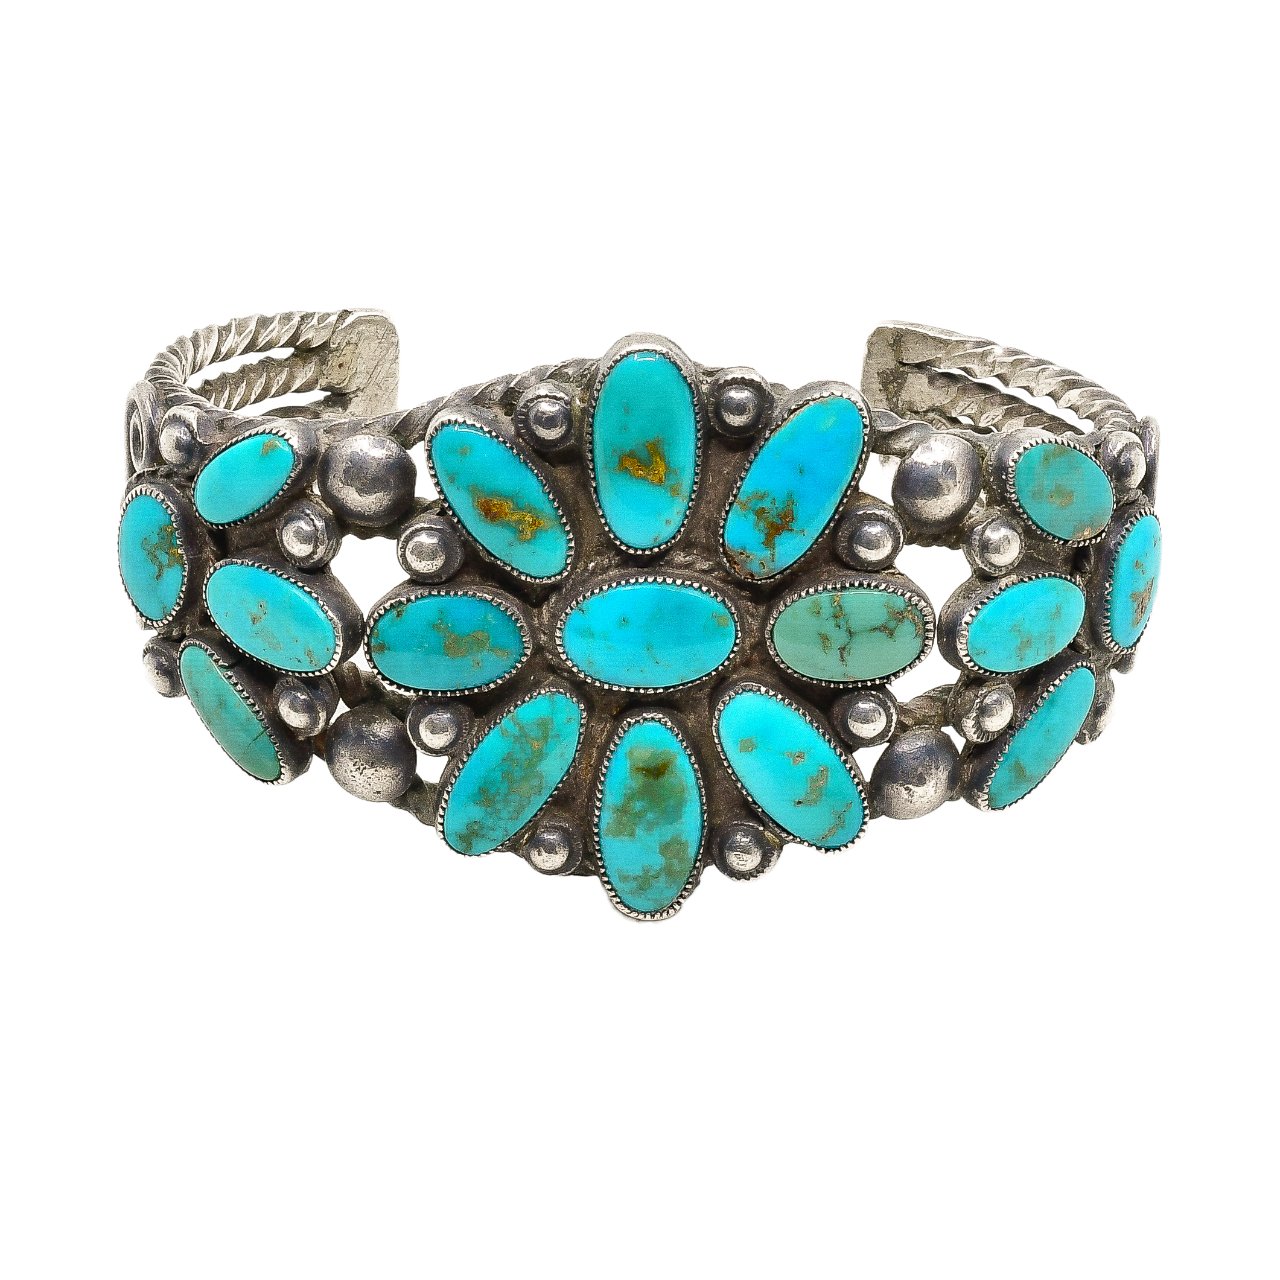 Old Navajo Blue Gem Turquoise Bracelet of Twisted Wire - Turquoise & Tufa